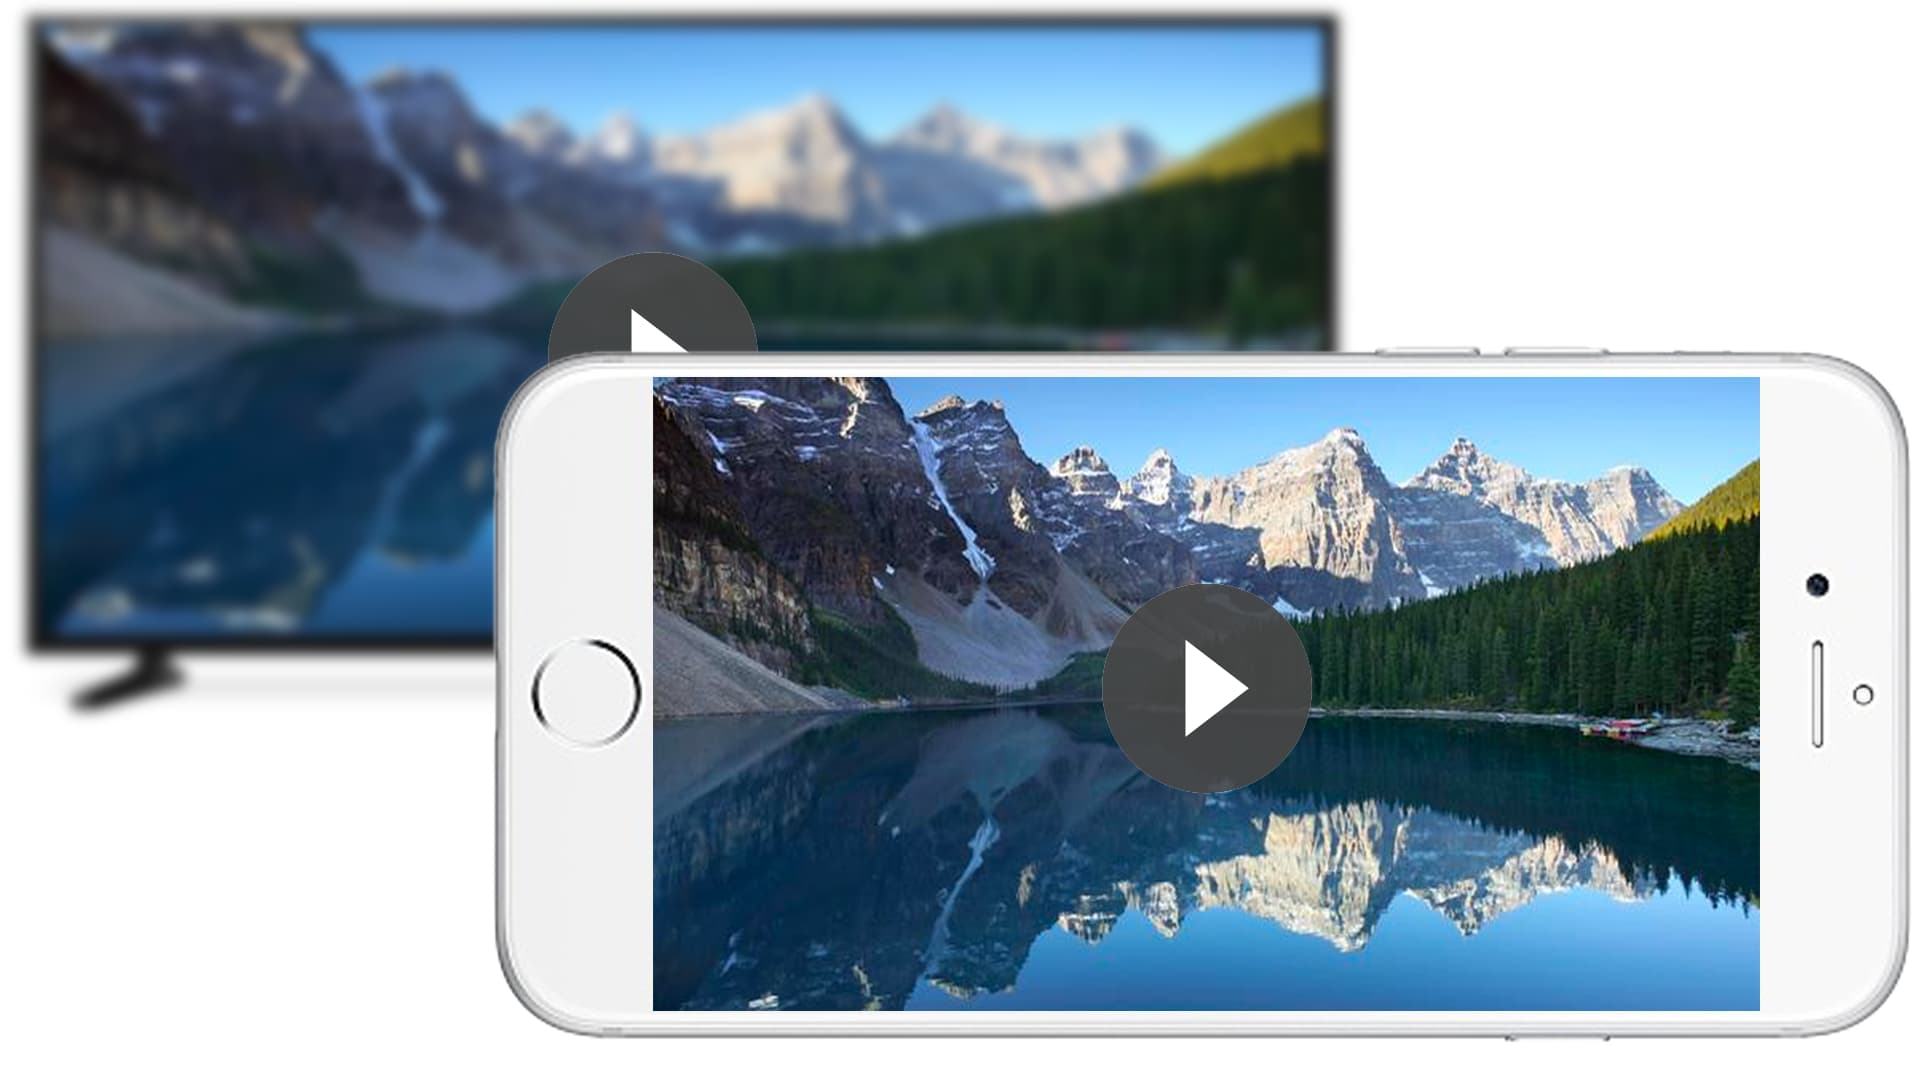 Mirror Your Iphone Or Ipad On A Smart Tv, Mirror Ios To Panasonic Tv